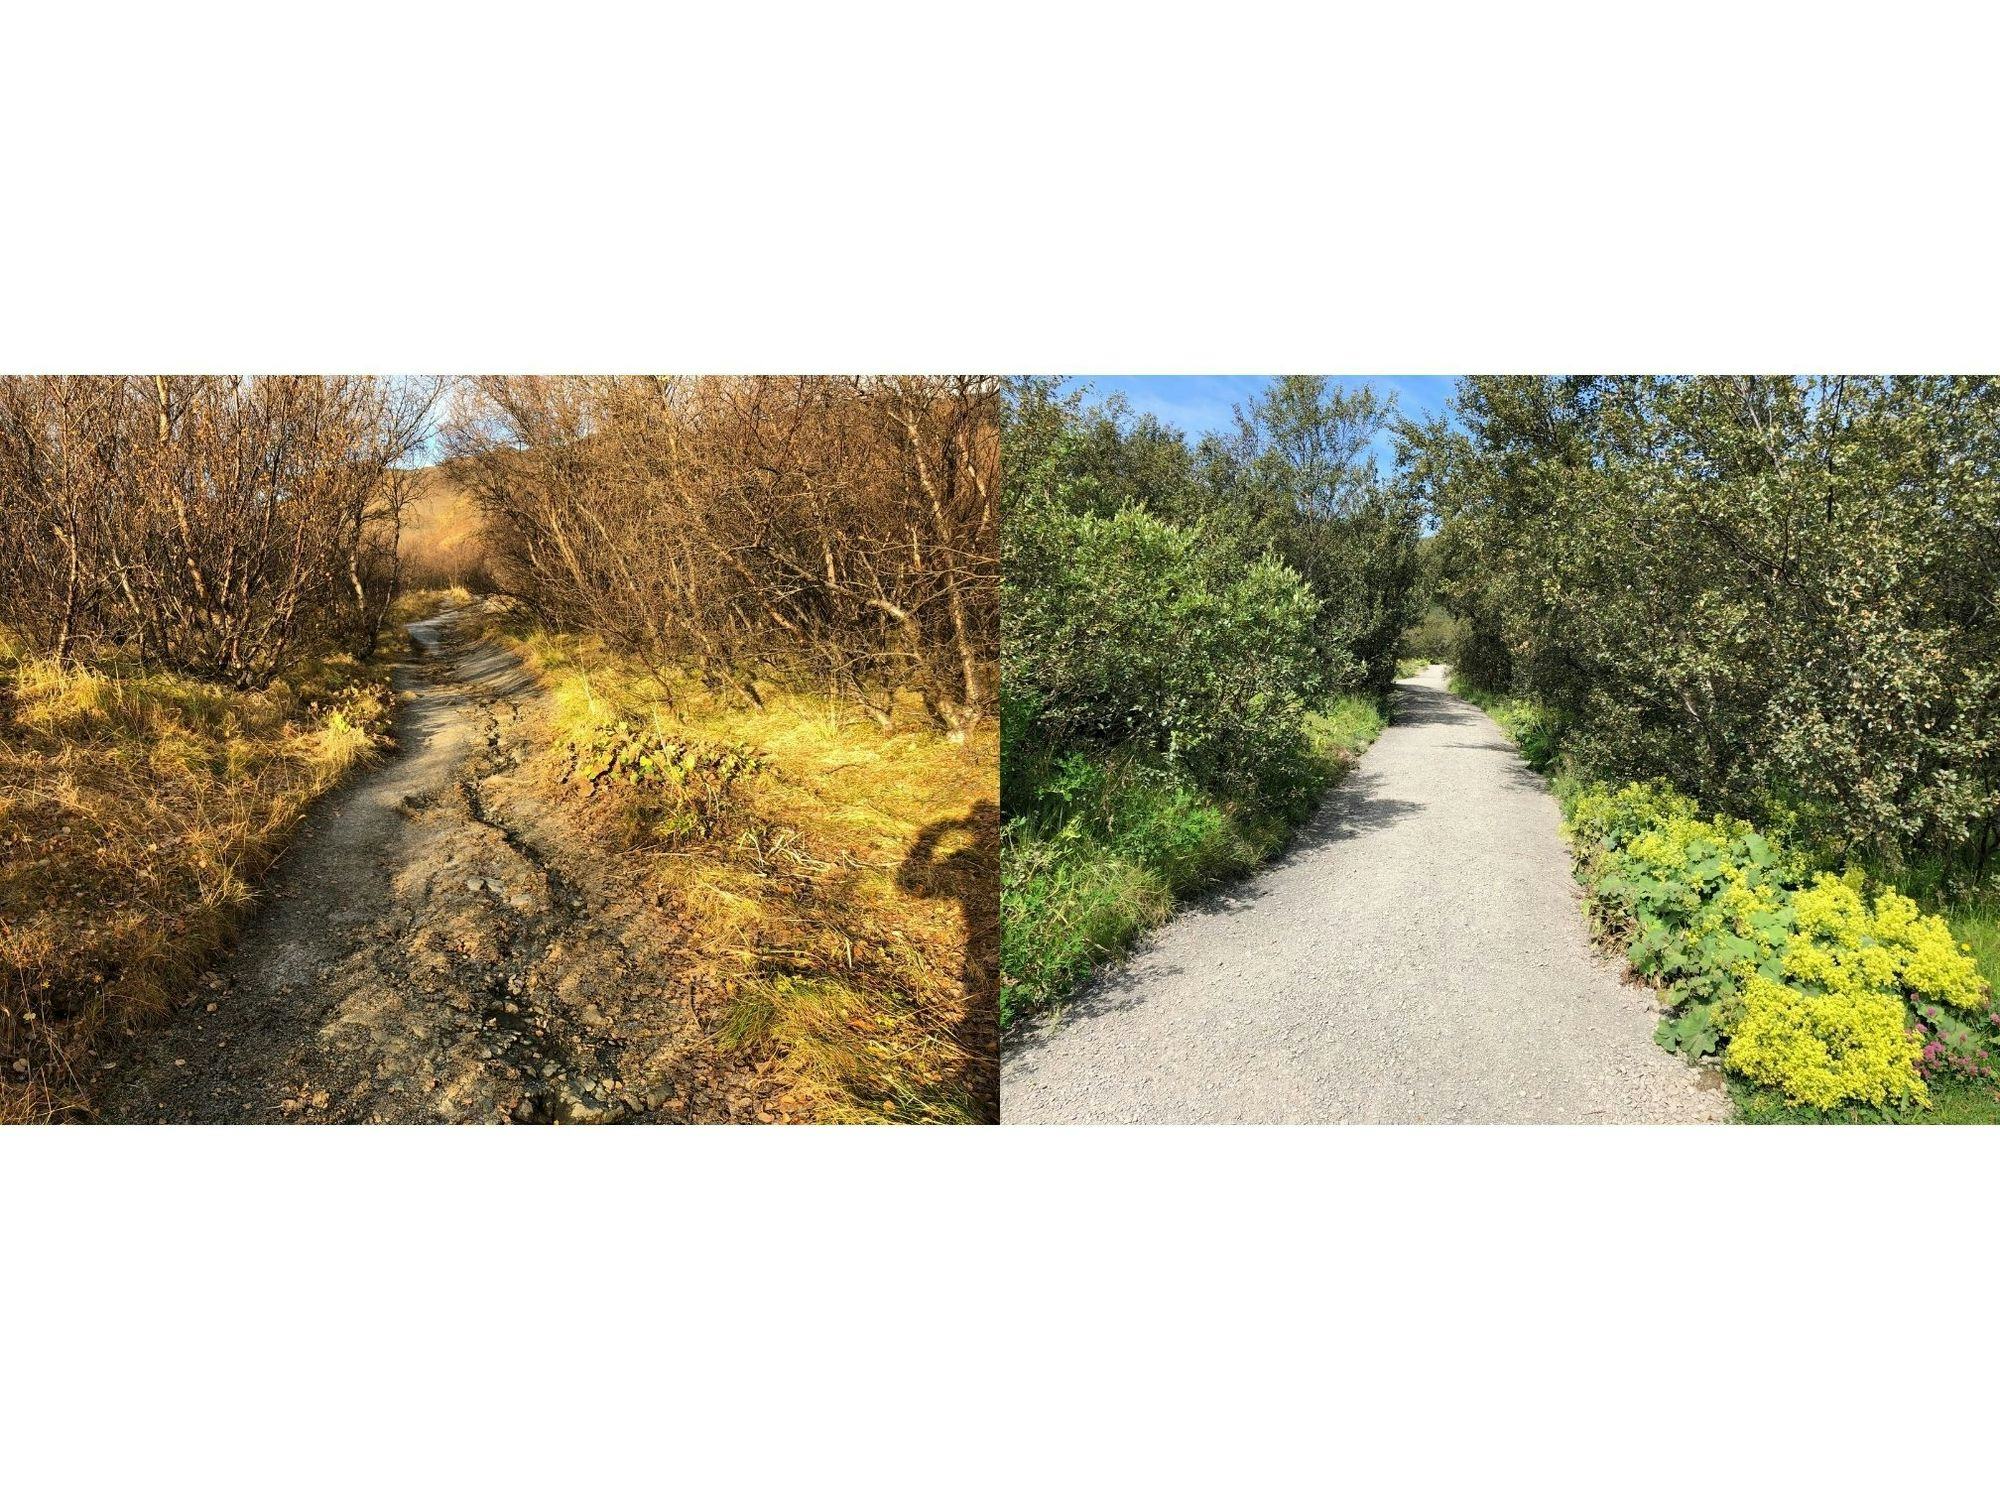 The picture shows one rugged dirty path and the other a smooth gravel walkway